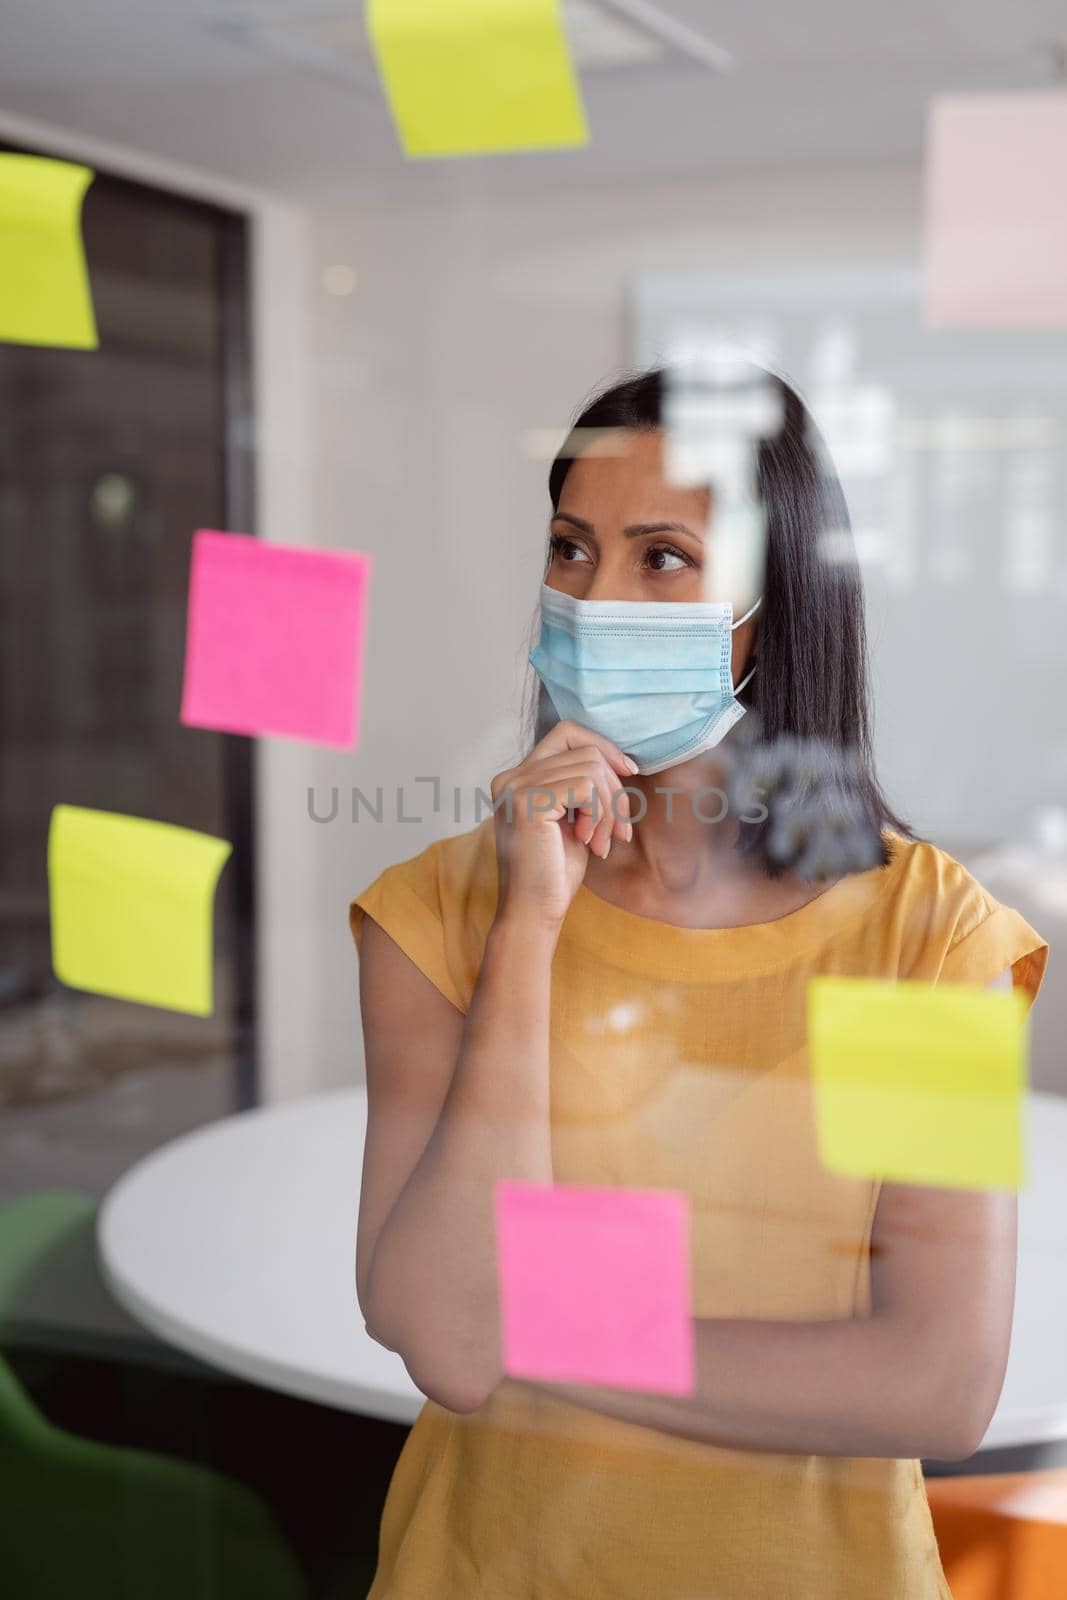 Caucasian businesswoman wearing face mask brainstorming, reading colourful memo notes on glass wall. working in business at a modern office during coronavirus covid 19 pandemic.